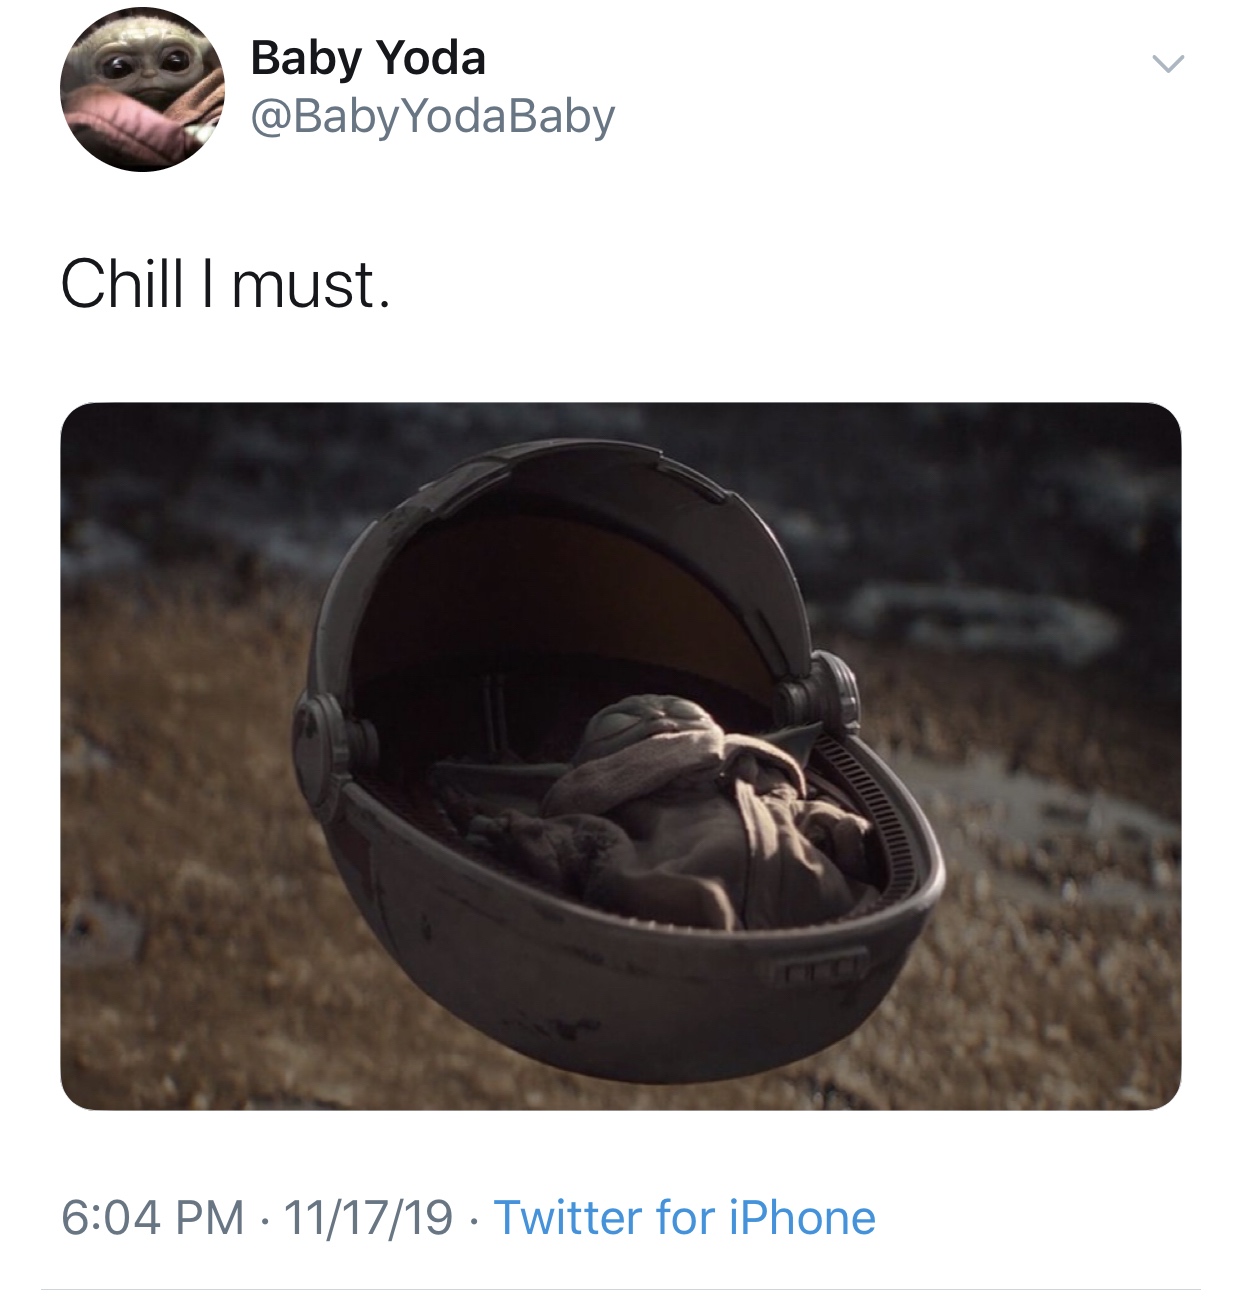 baby yoda meme - goggles - Baby Yoda YodaBaby Chill I must Www 111719 Twitter for iPhone